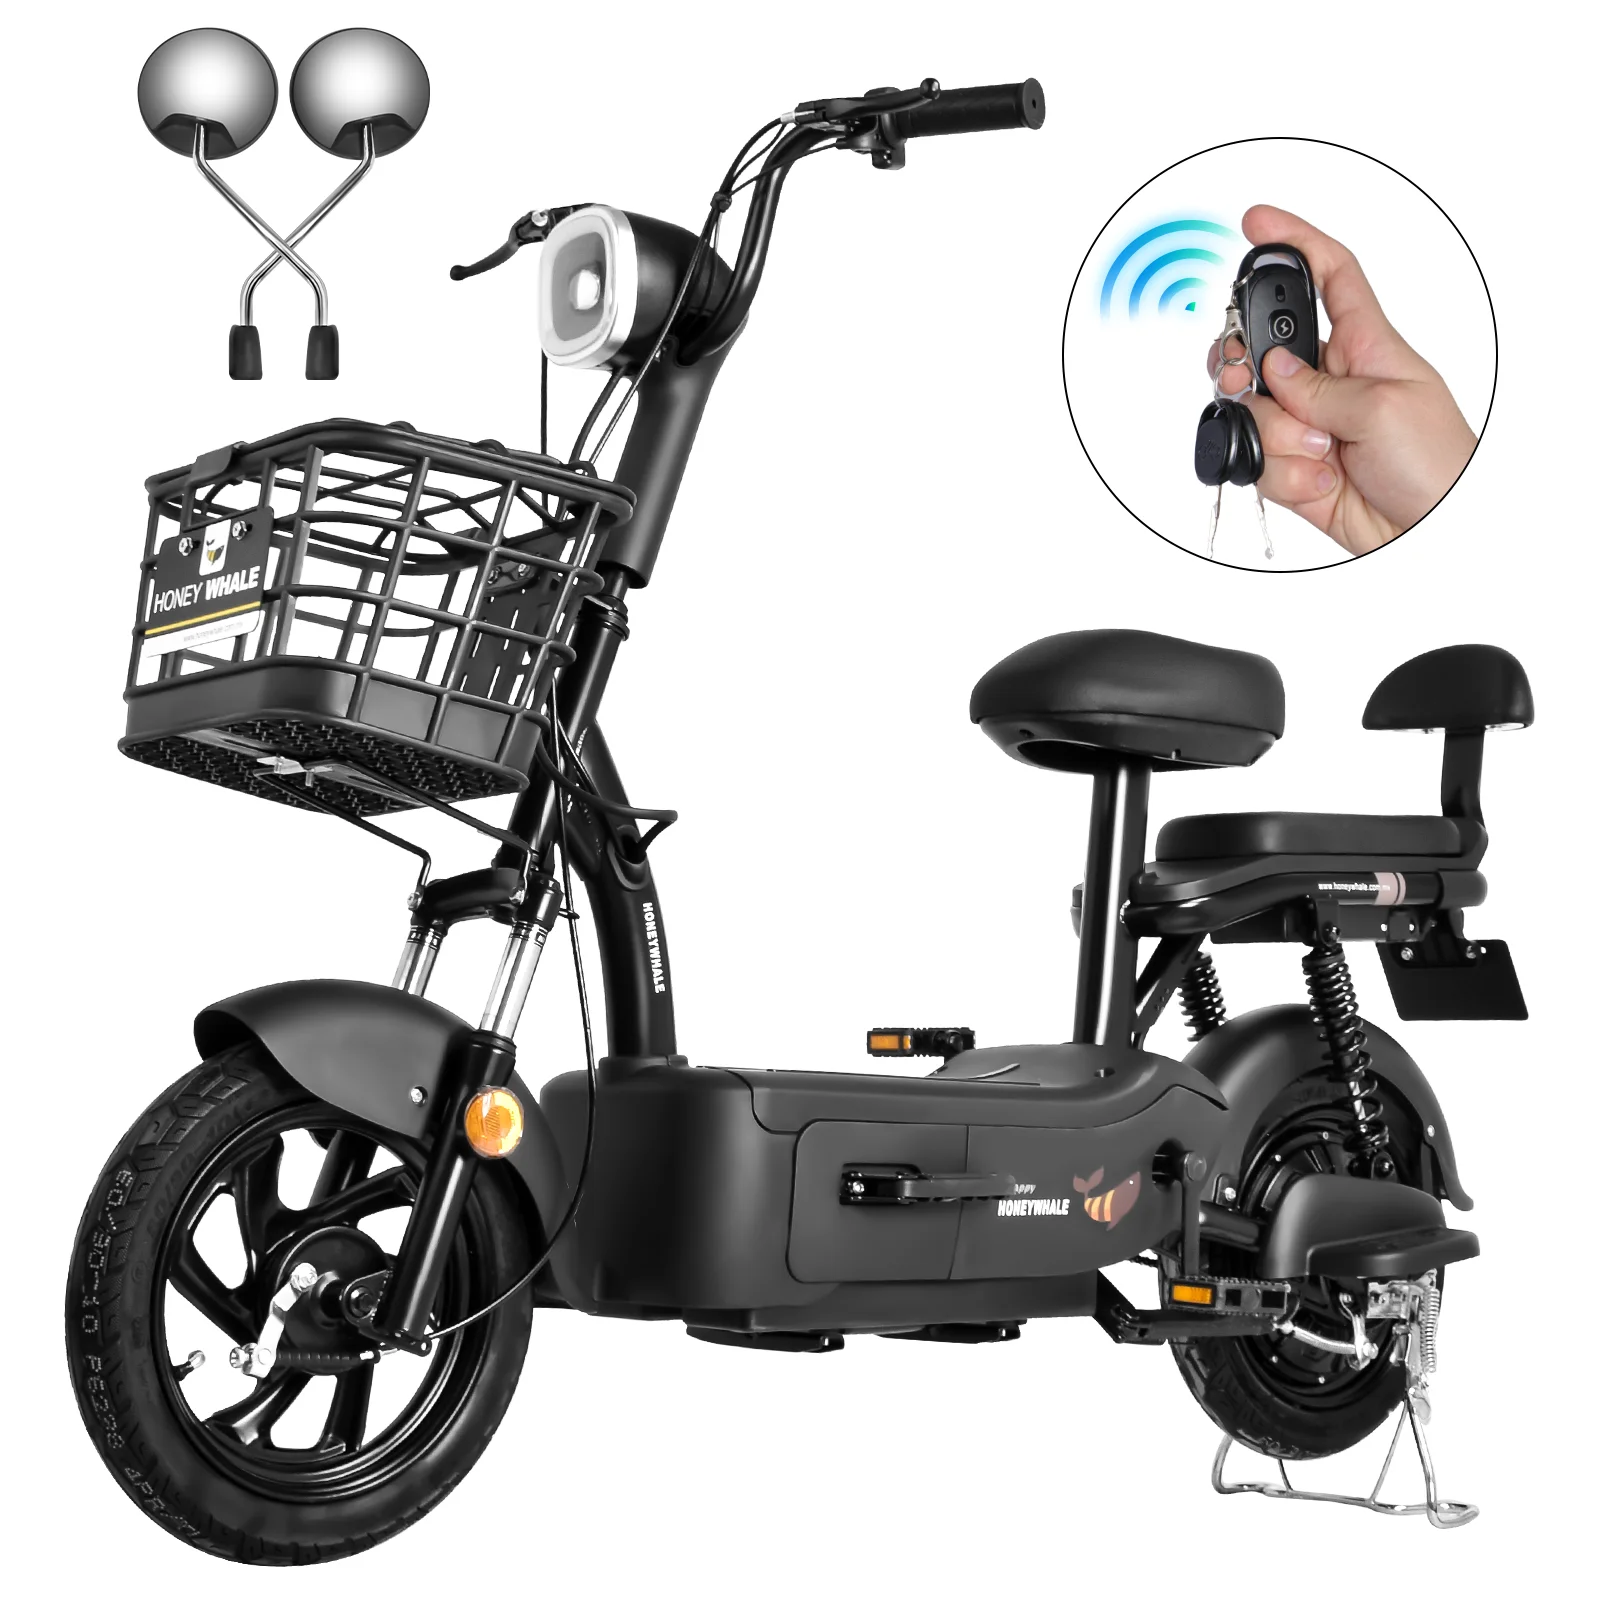 

HONEYWHALE U1s electric bicycle for adults, electric bike with alarm, maximum engine 650W, maximum speed 31 KM/H, range 60-65KM, 20AH large capacity batteries, two seats, shipping from Mexico